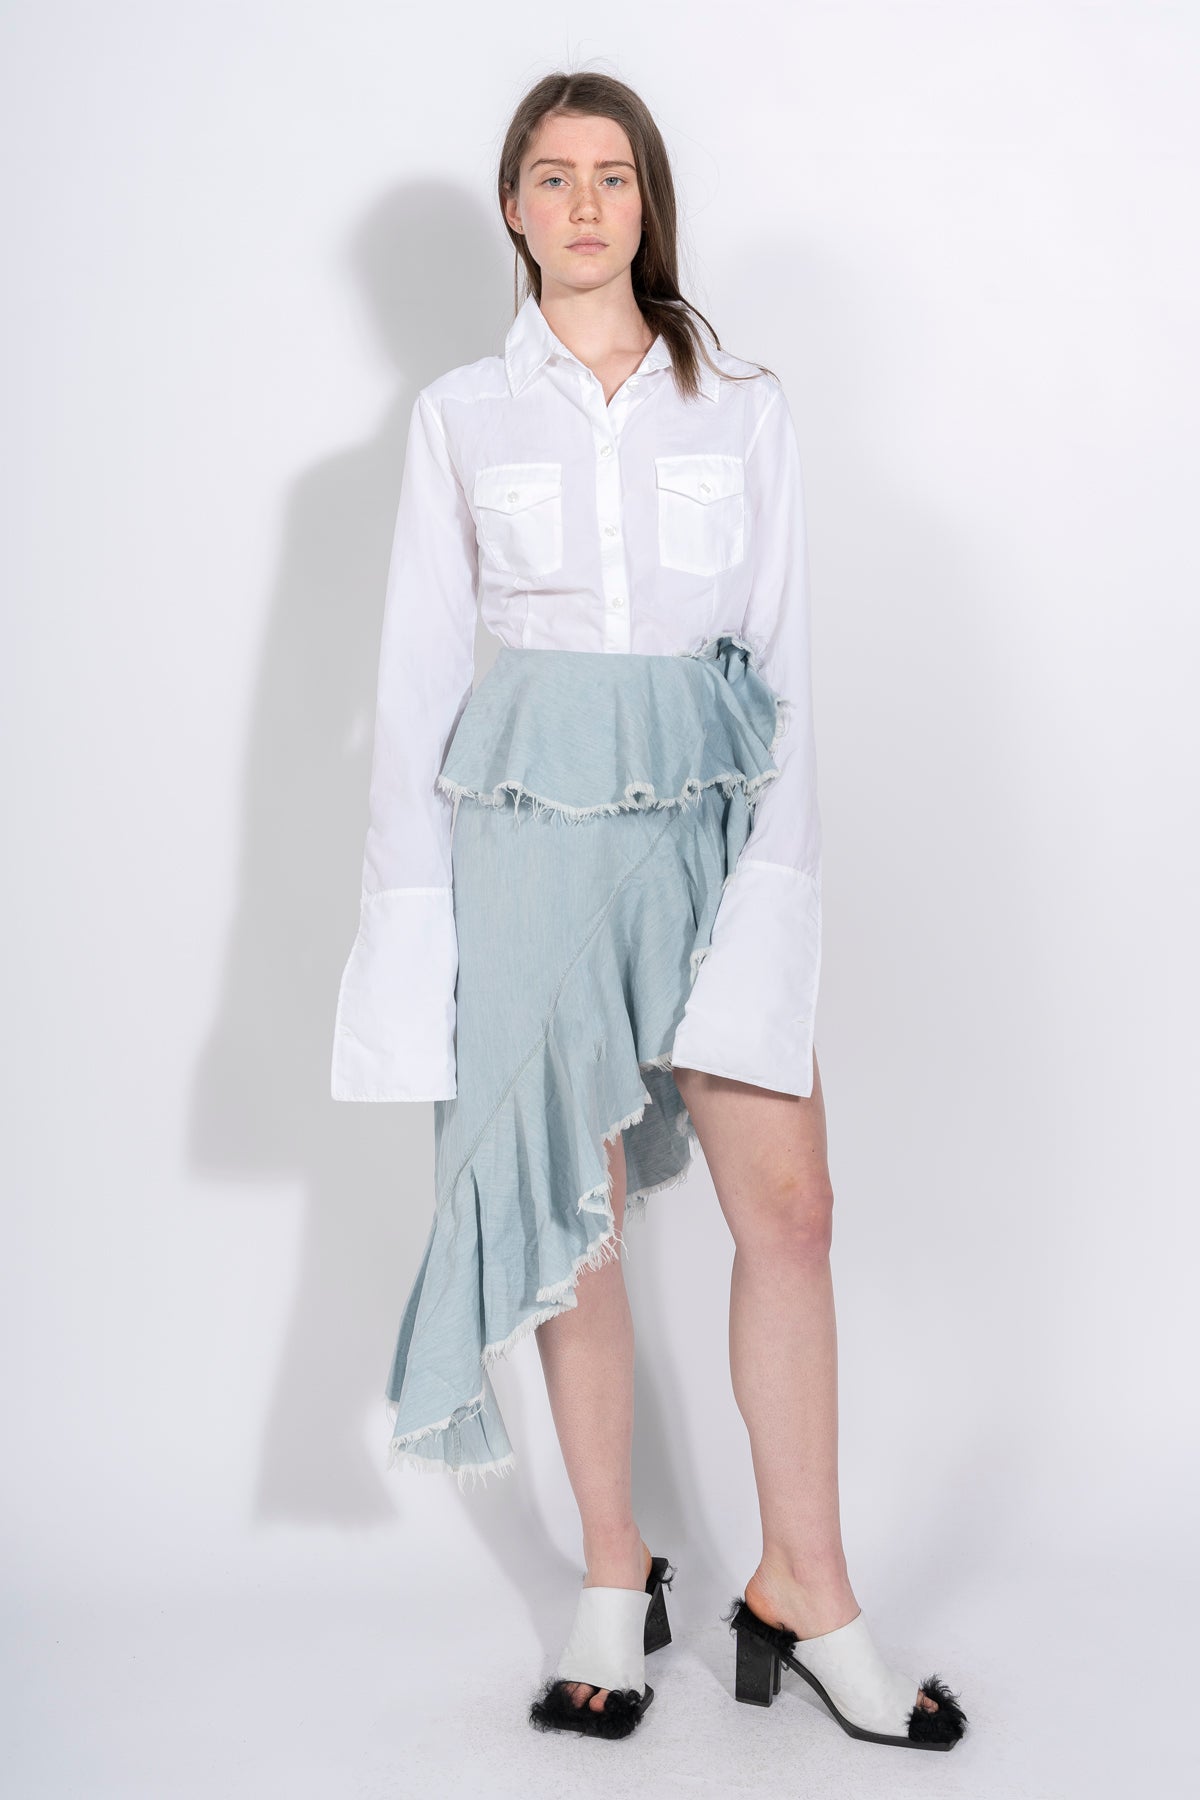 OVERSIZED SHIRT WITH LARGE CUFFS marques almeida